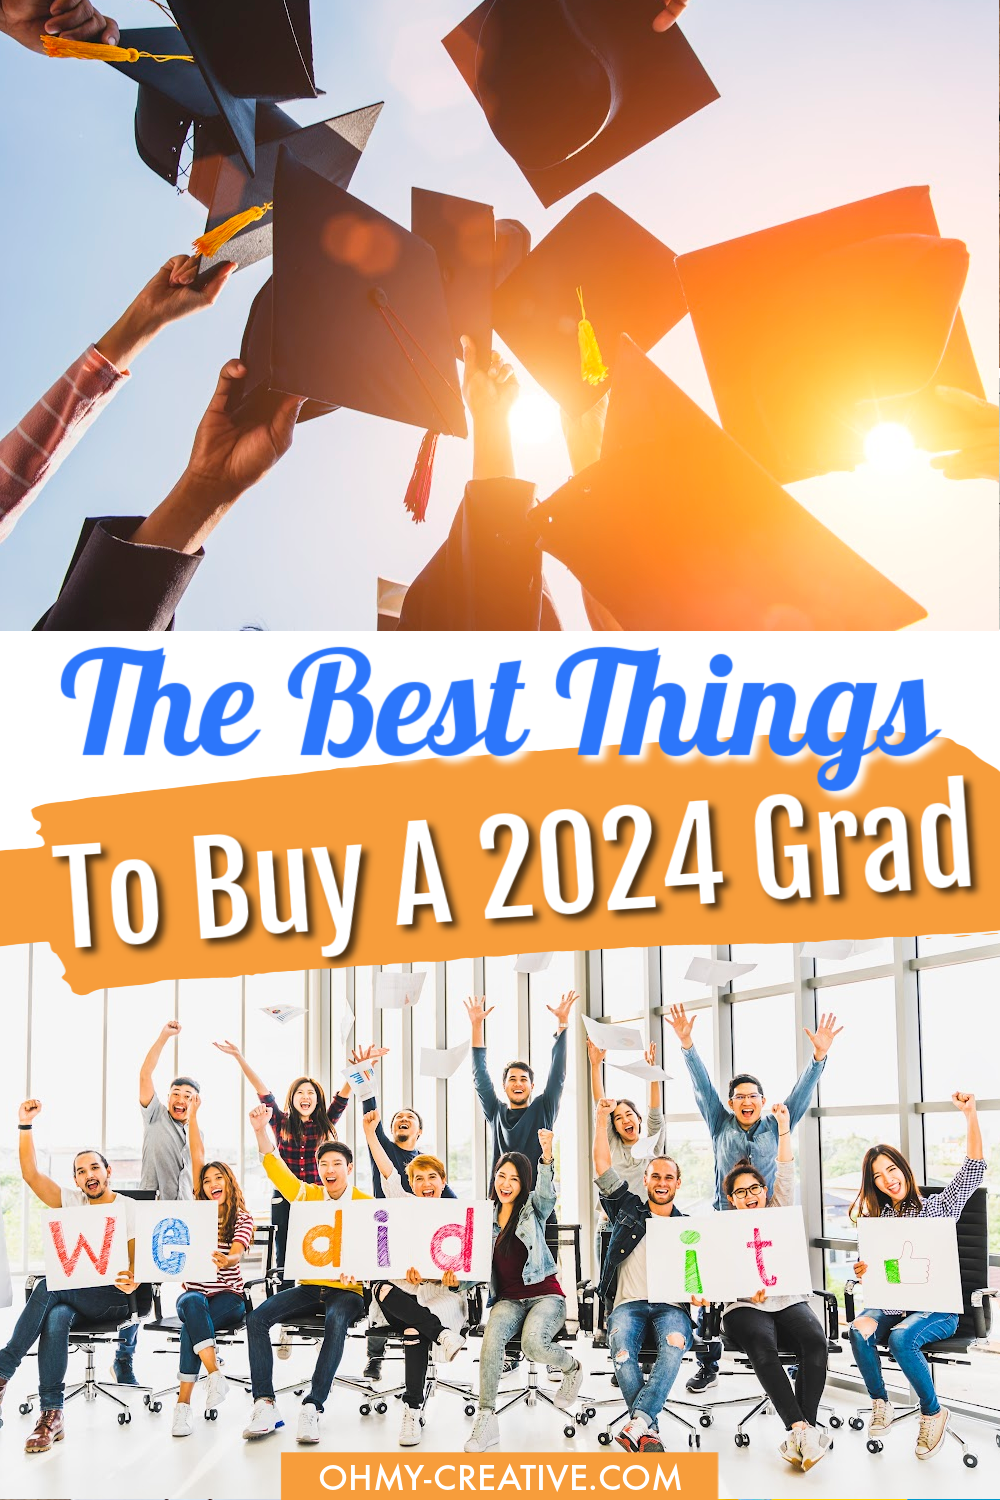 Graduation Gift Ideas: The Best Things To Buy A 2024 Graduate